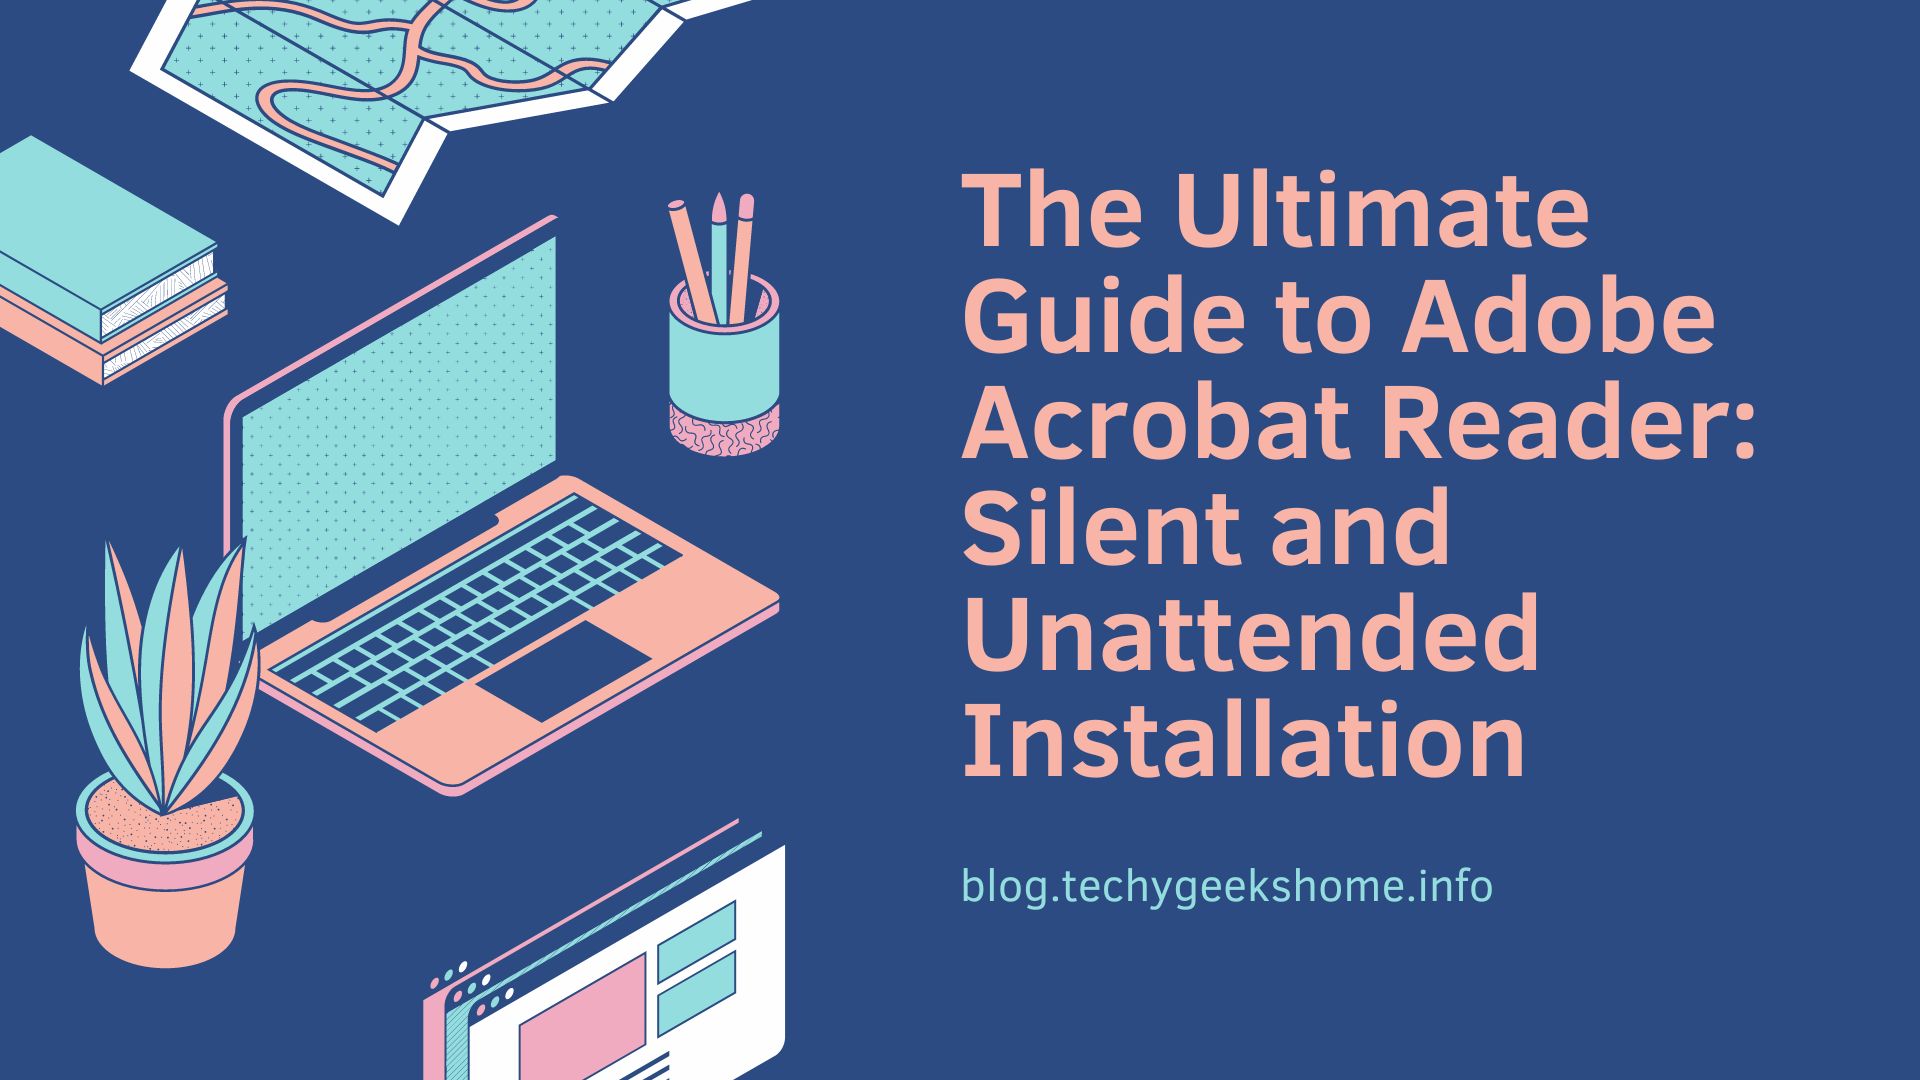 The Ultimate Guide to Adobe Acrobat Reader Silent and Unattended Installation